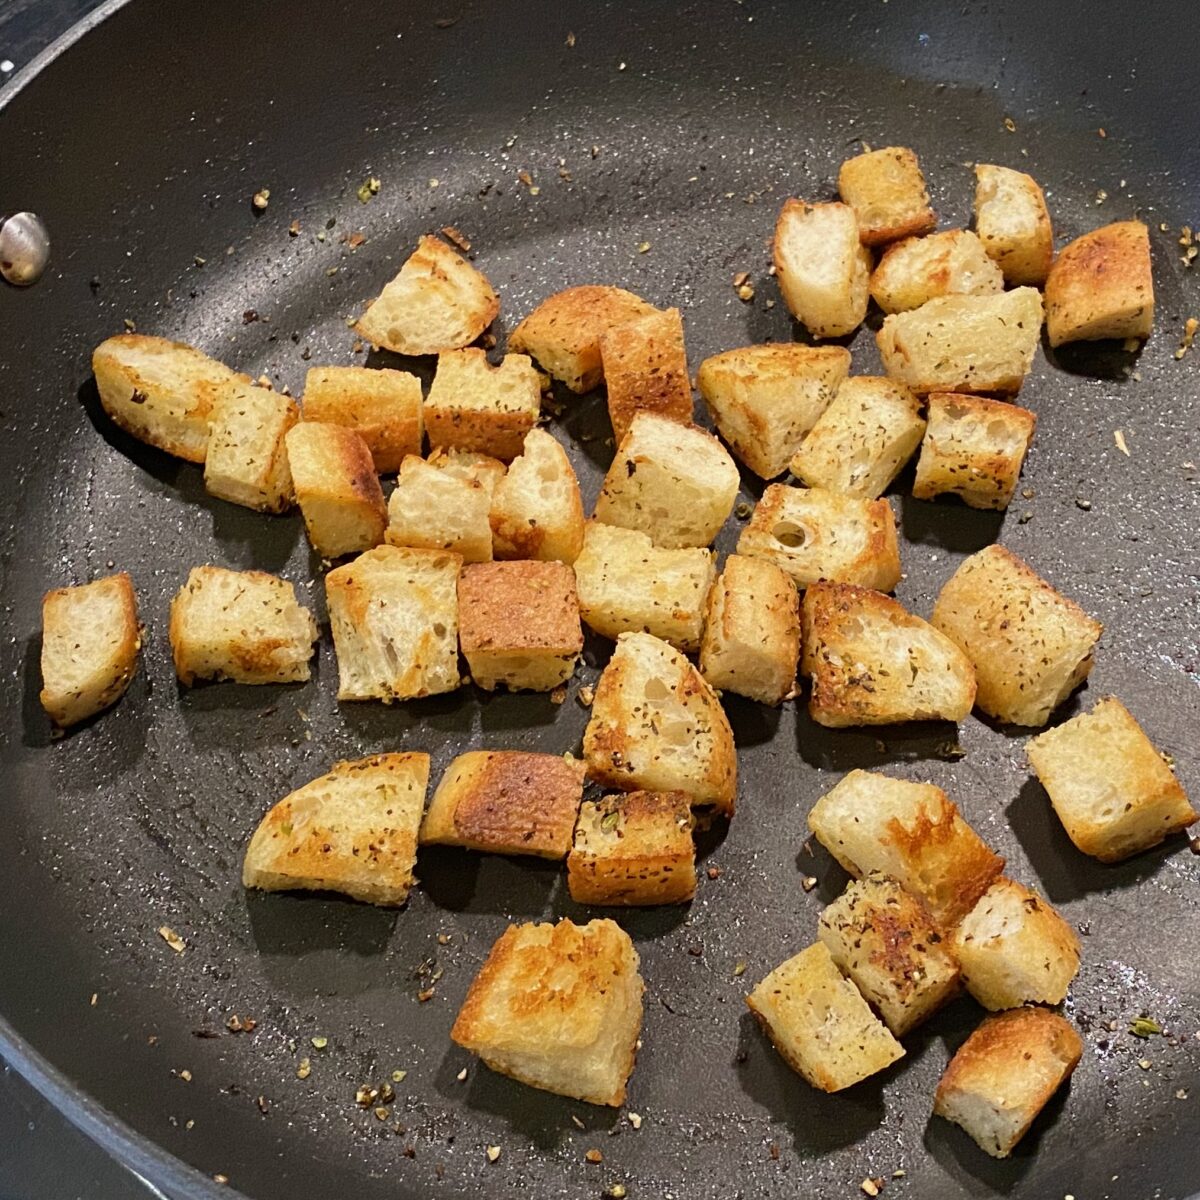 Freshly made stovetop croutons that have just been seasoned and are still in the skillet.